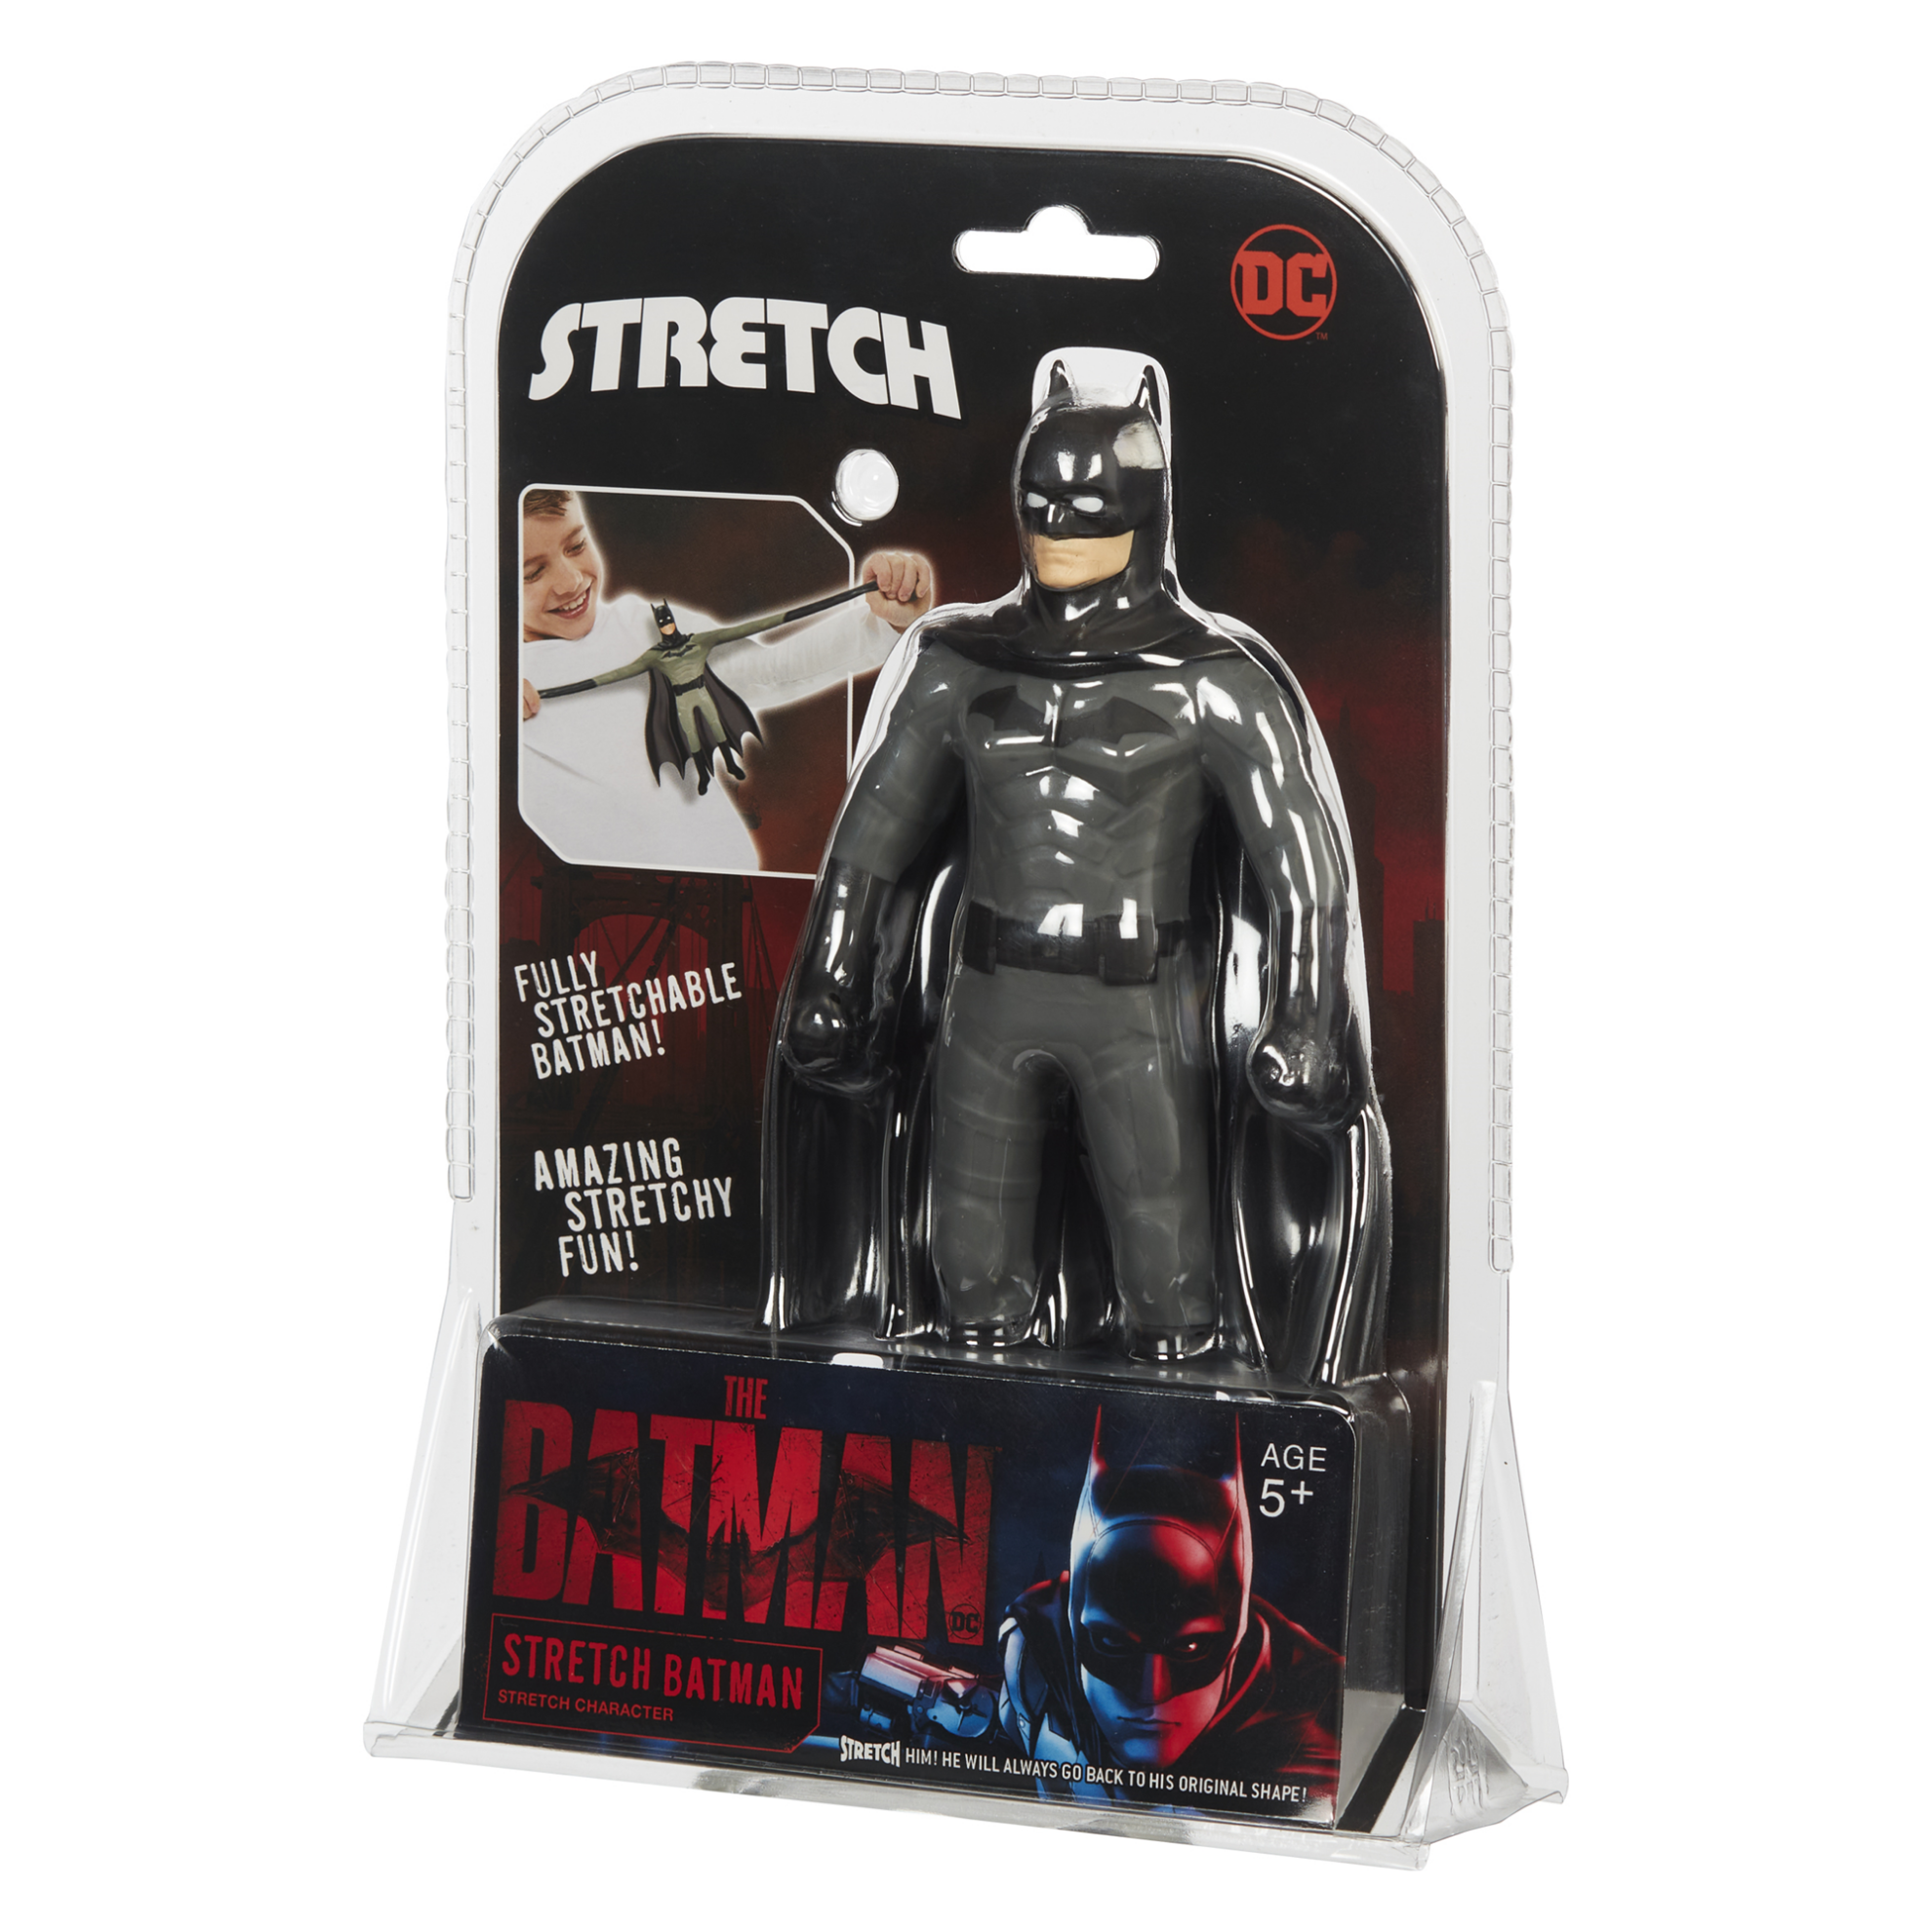 Stretch Mini Batman Toys from Character